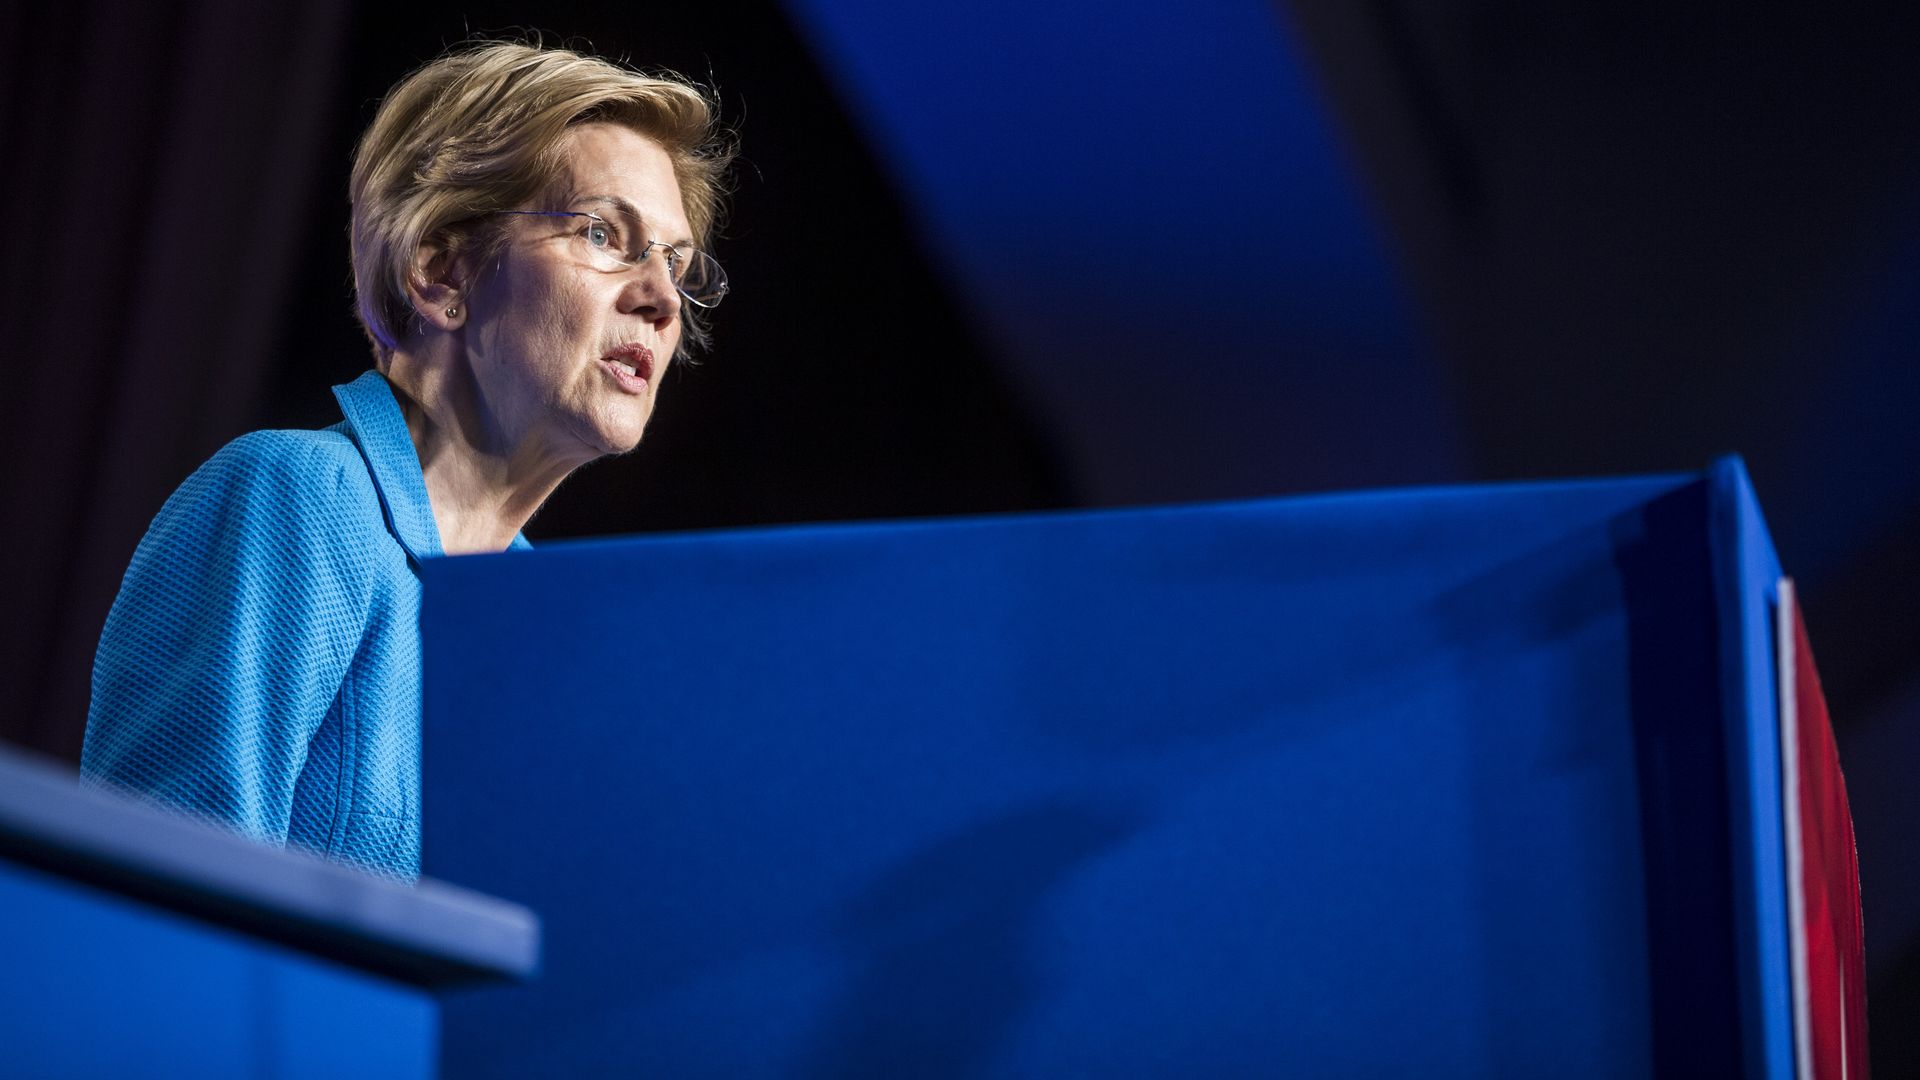 In this image, Elizabeth Warren stands and speaks behind a blue podium. 